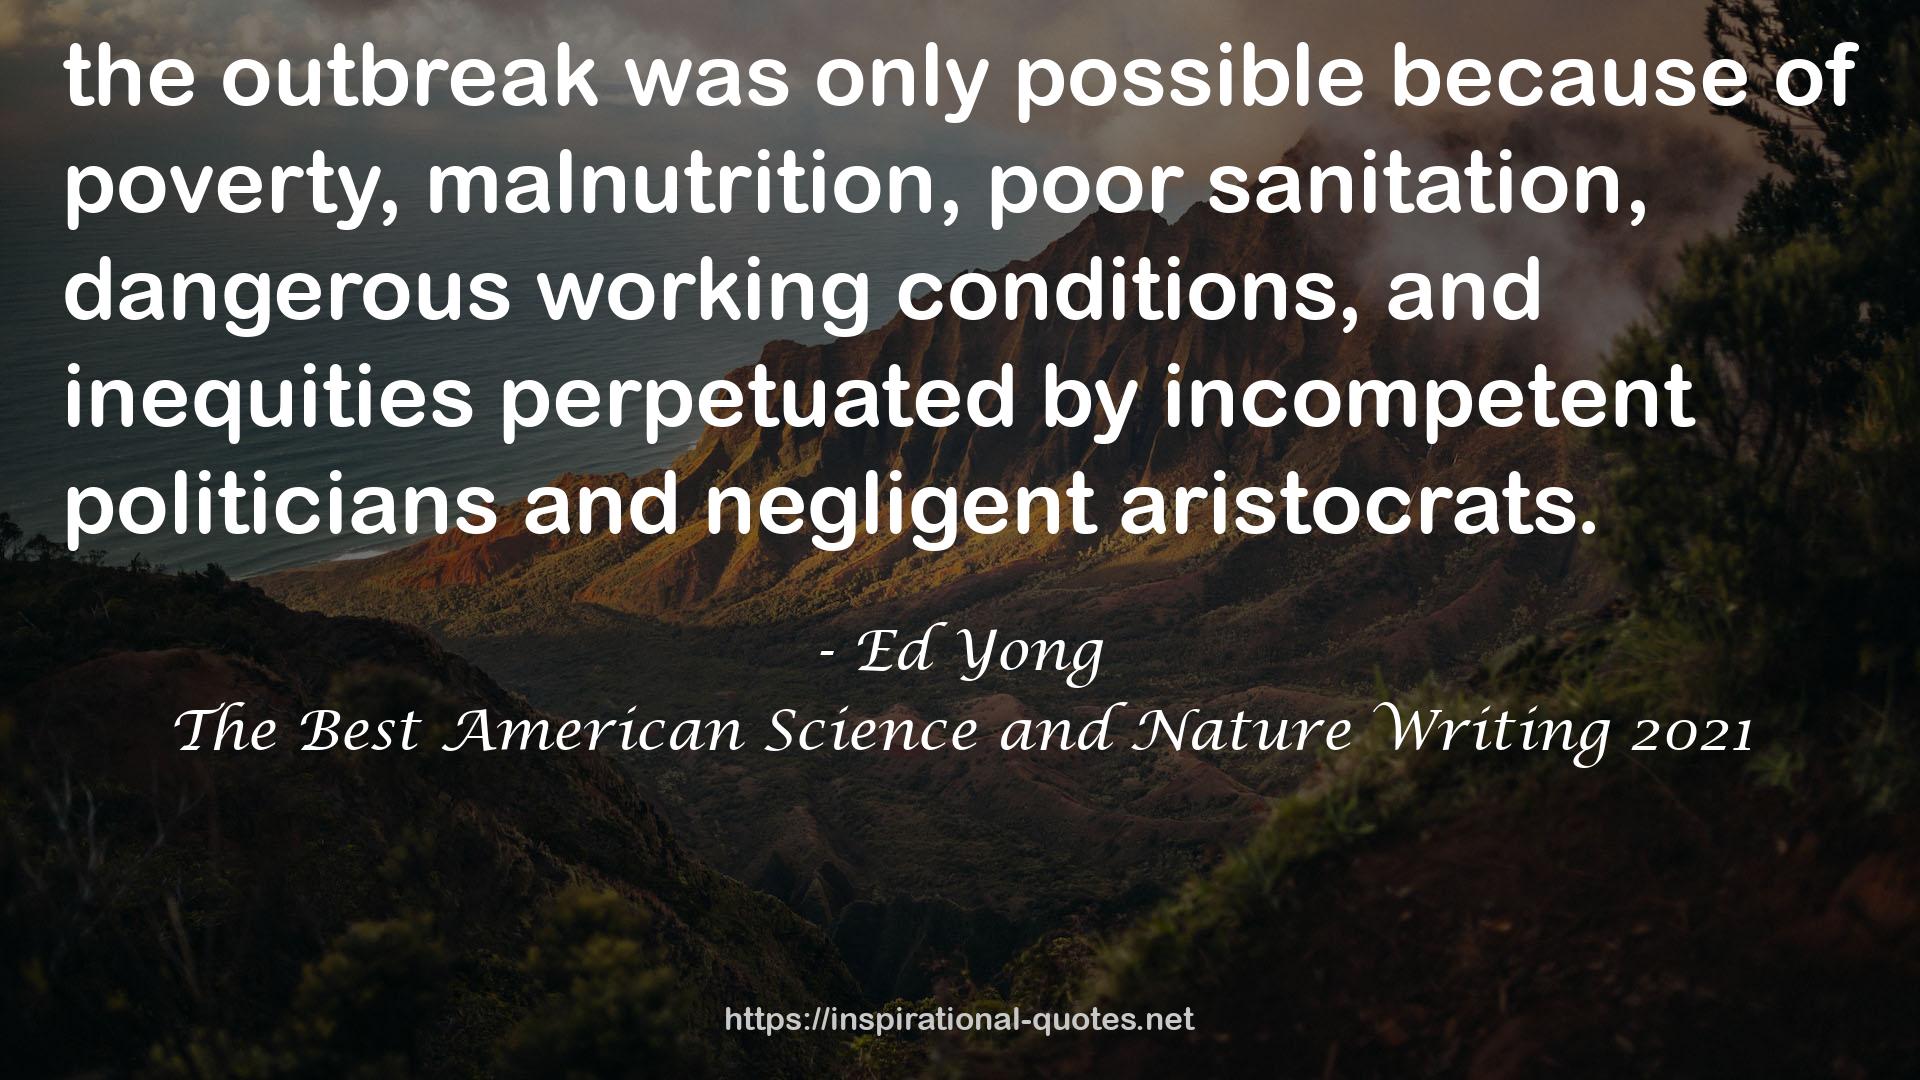 The Best American Science and Nature Writing 2021 QUOTES